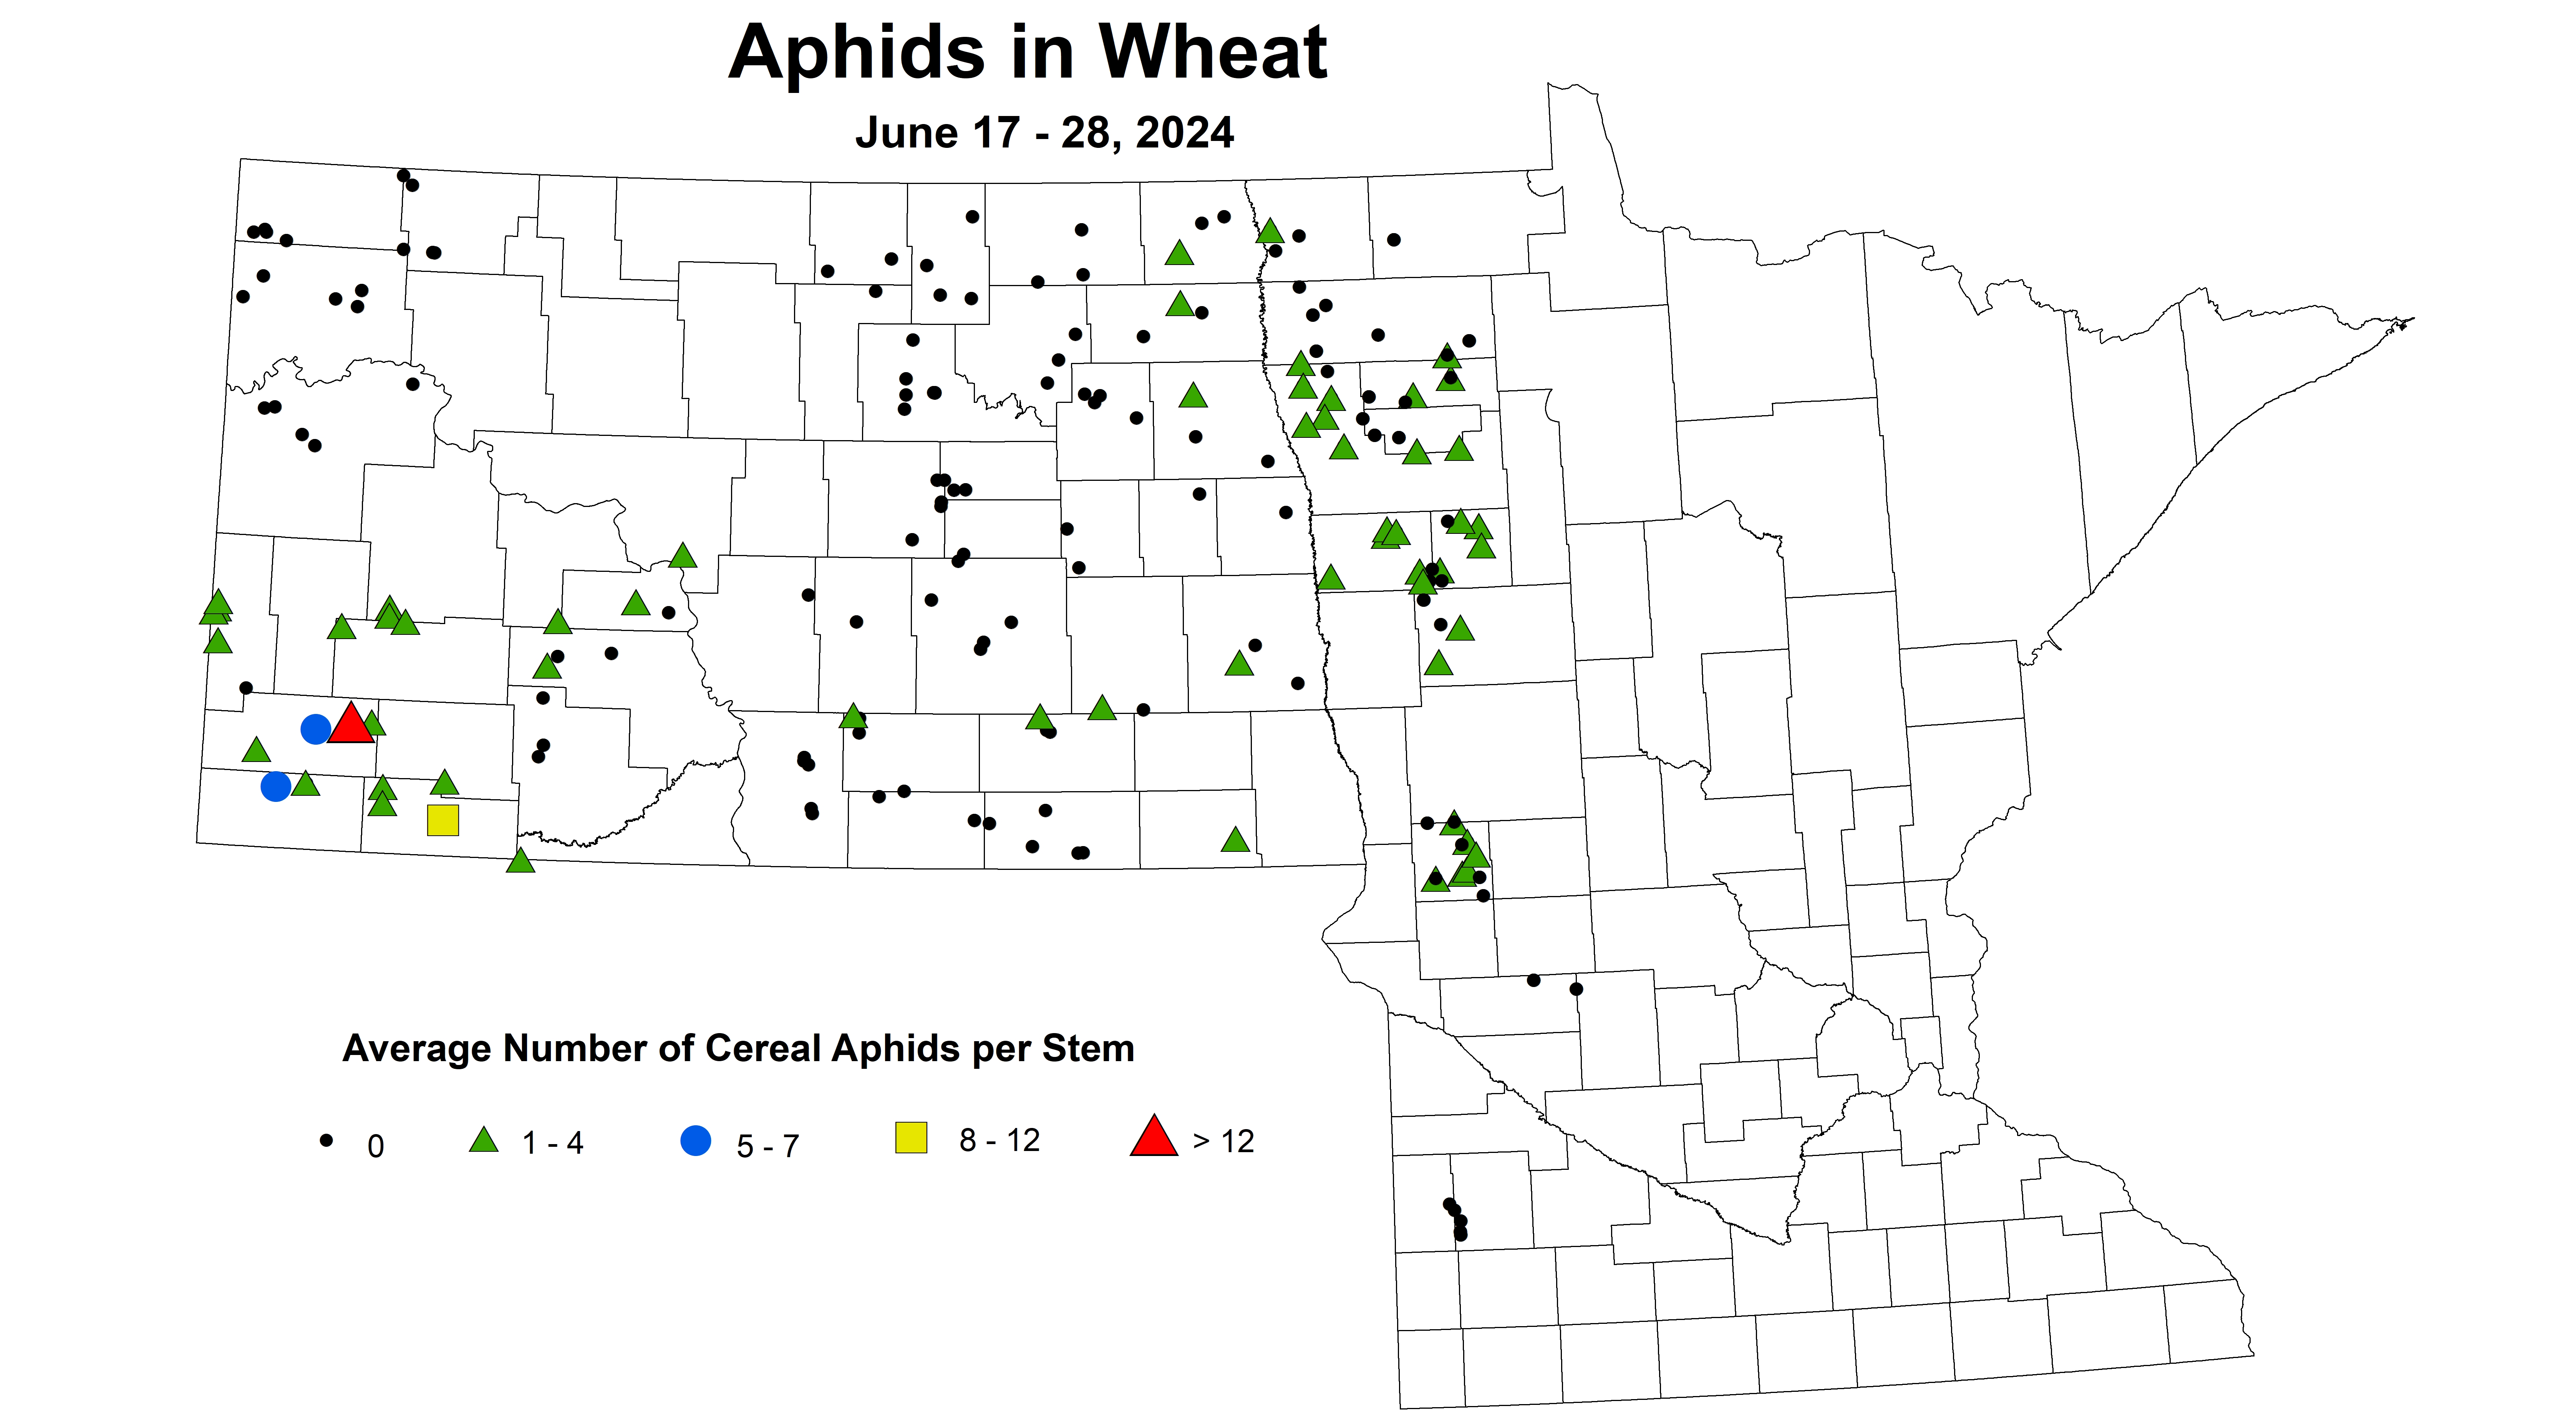 wheat aphids 2024 6.17-6.28